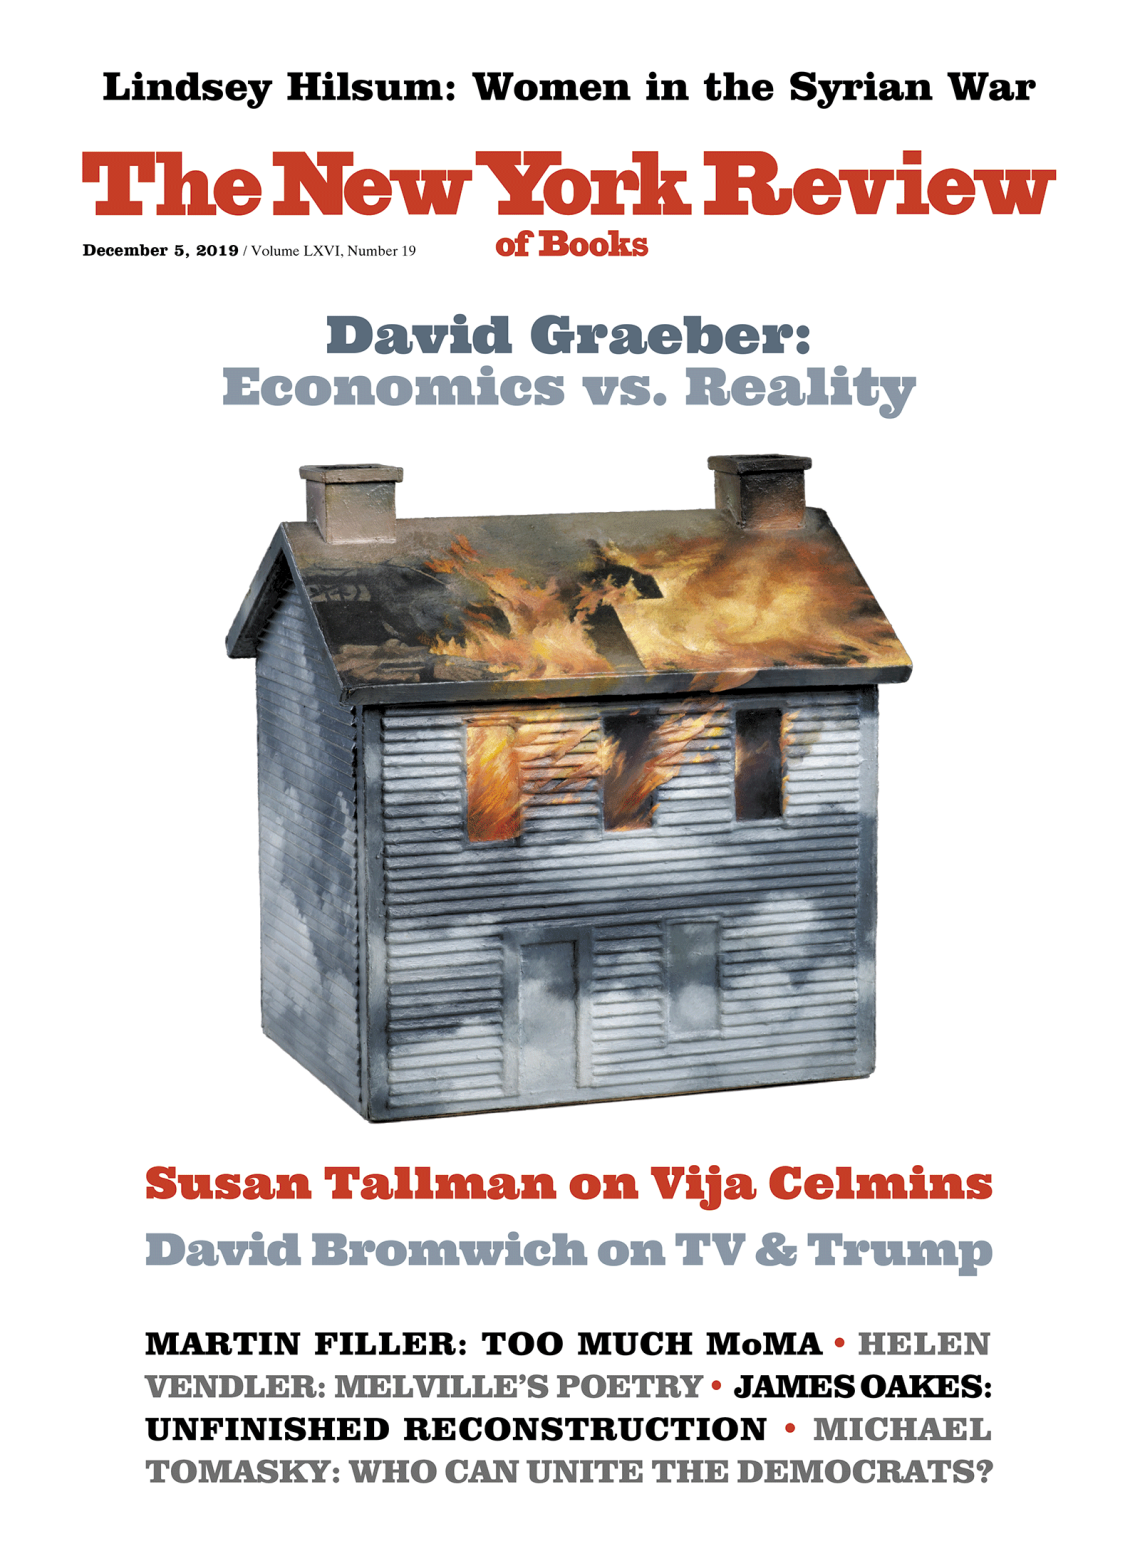 Image of the December 5, 2019 issue cover.